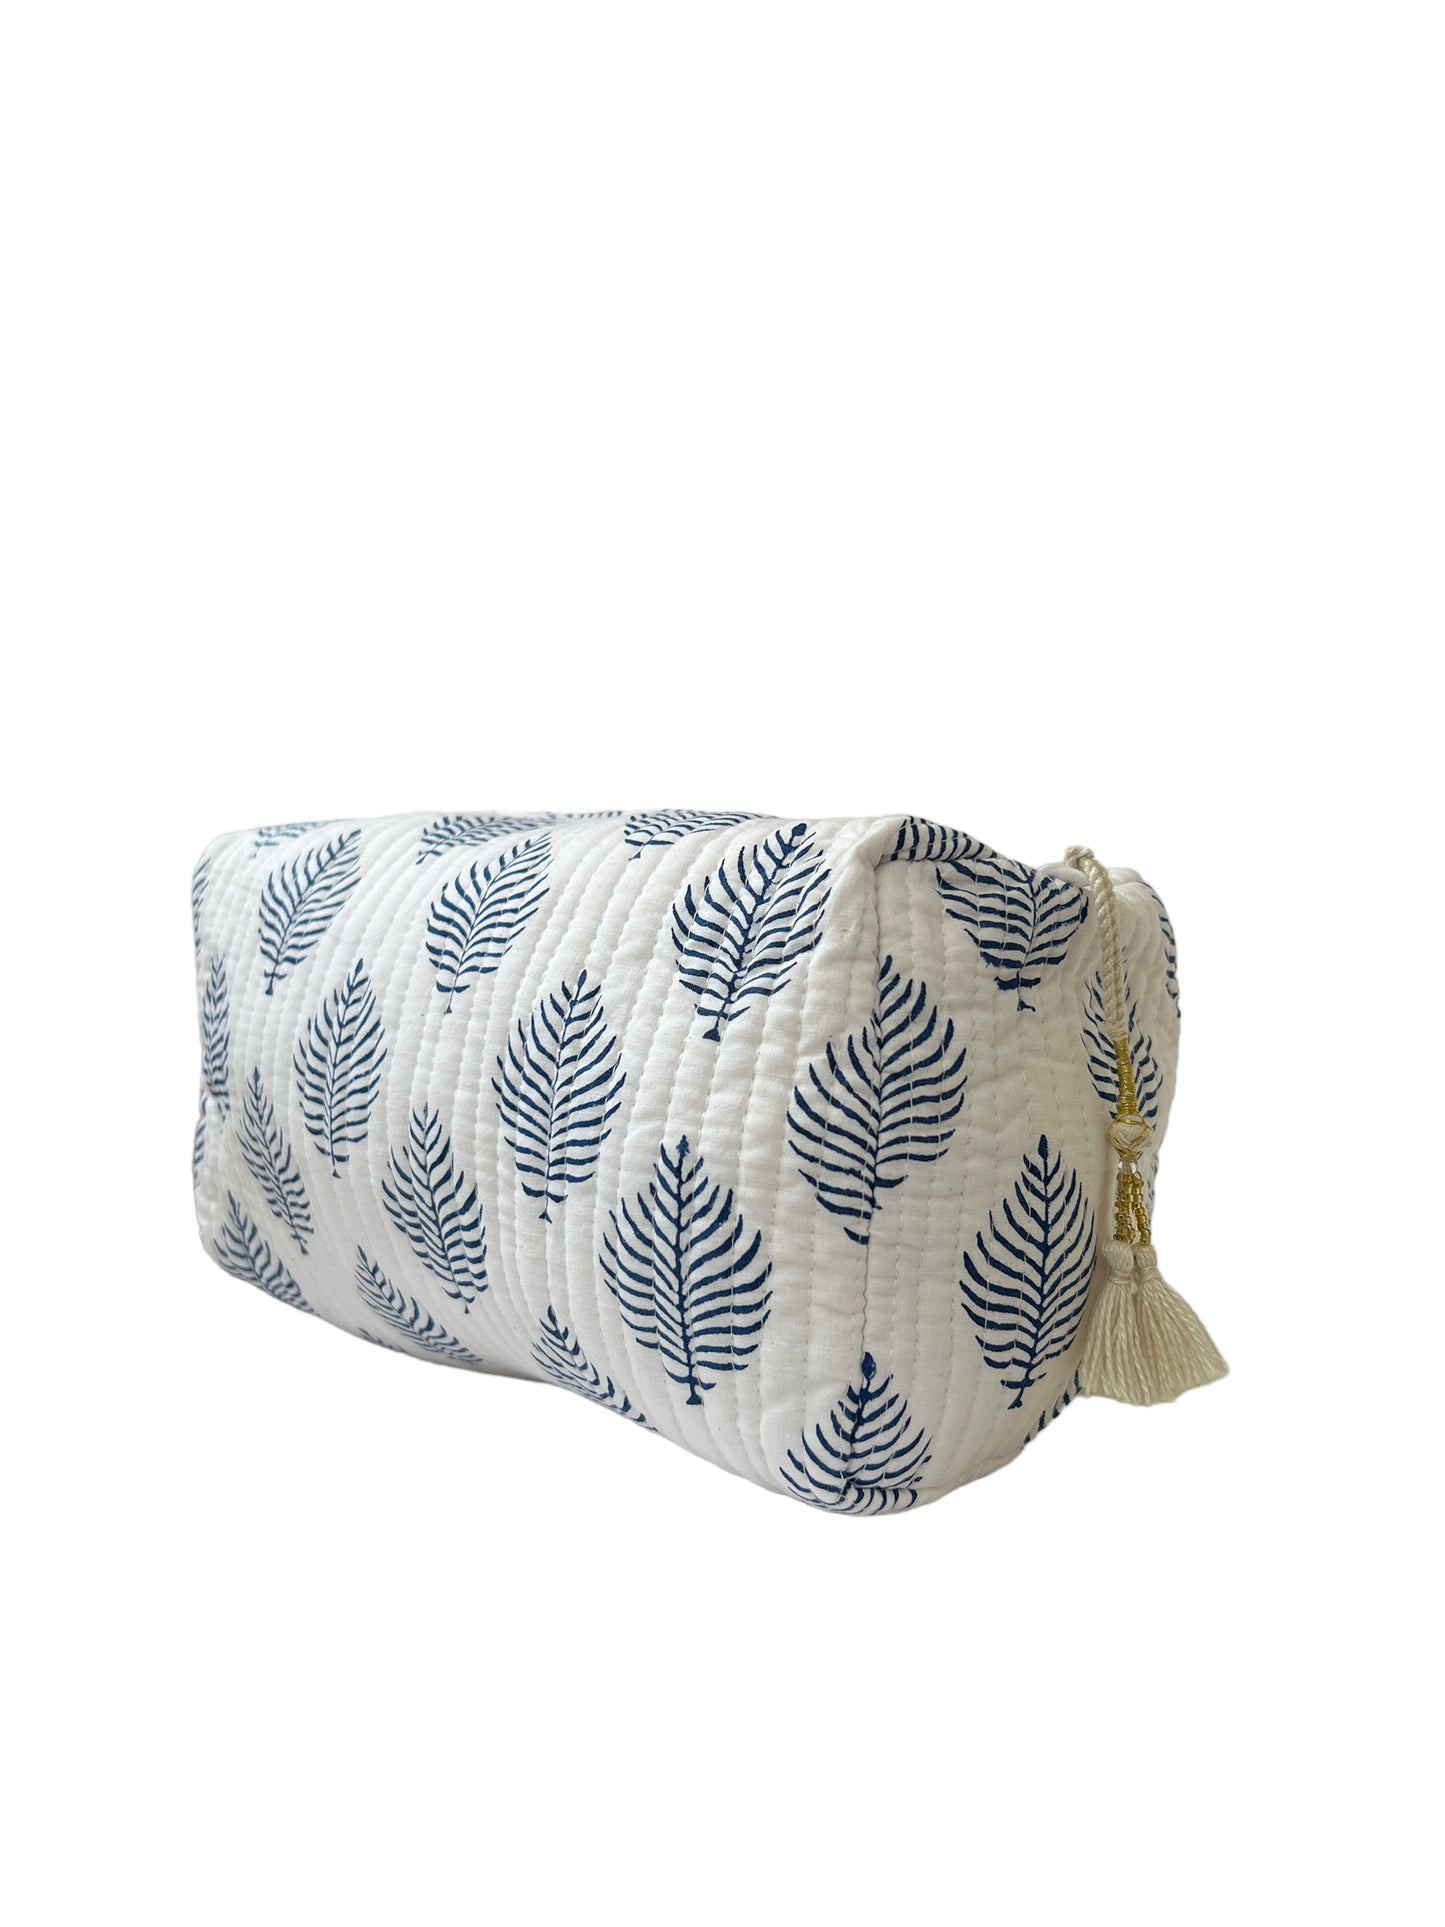 Make Up Bag Feathery Frond Blue (M004)